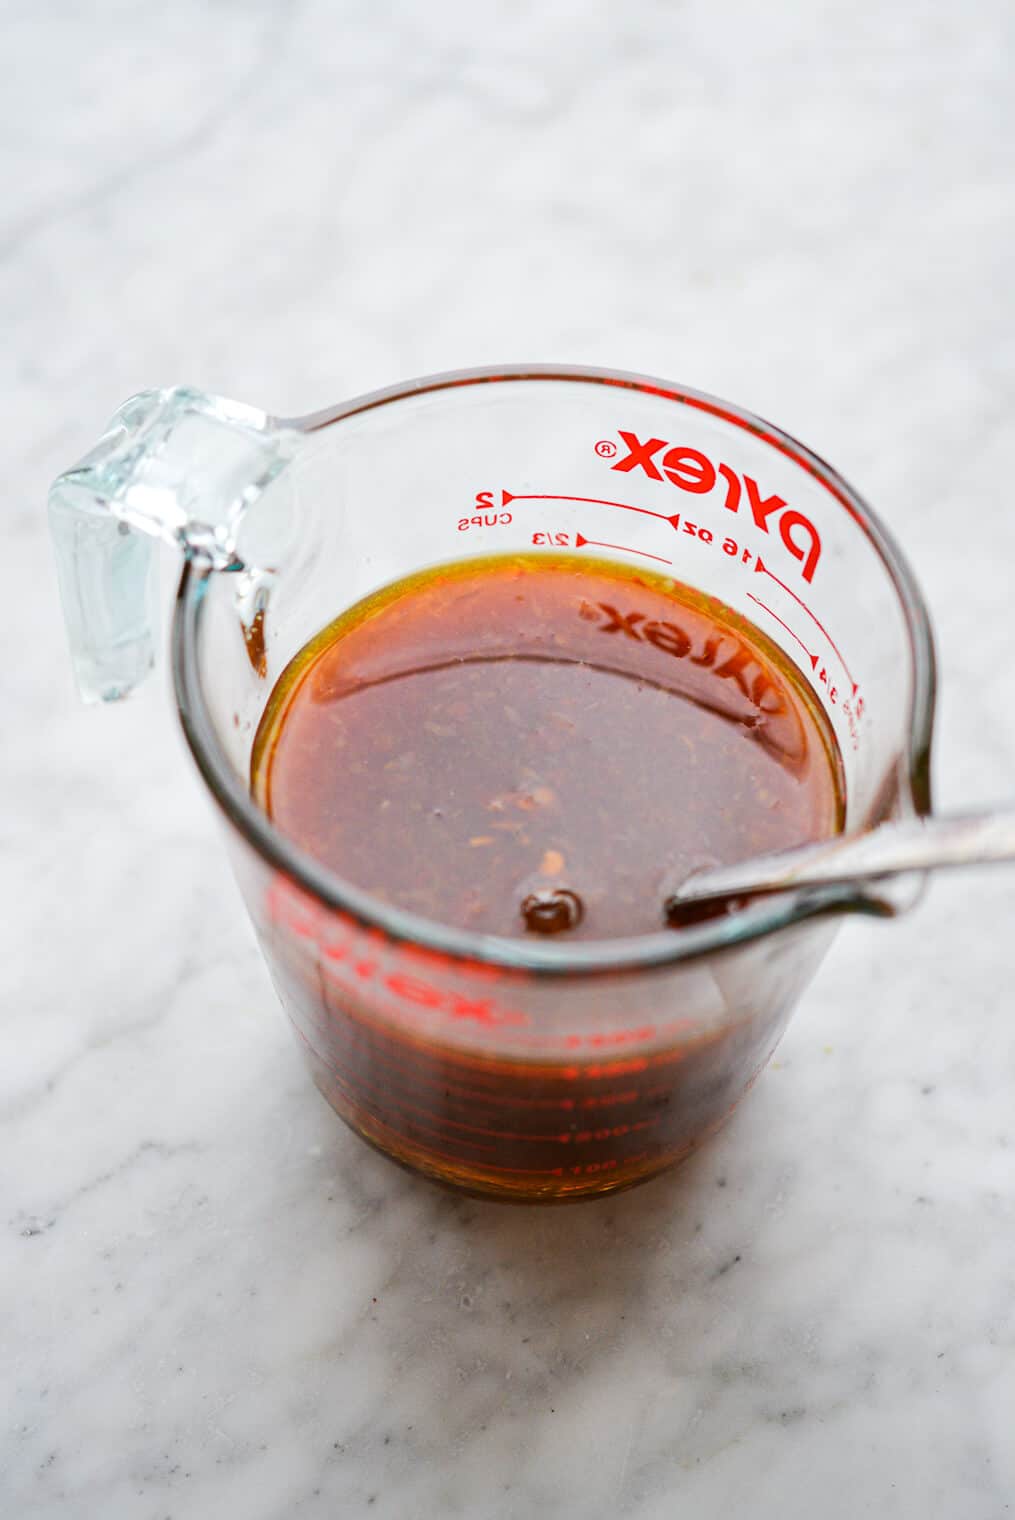 Stir fry sauce mixture in a measuring cup with silver spoon